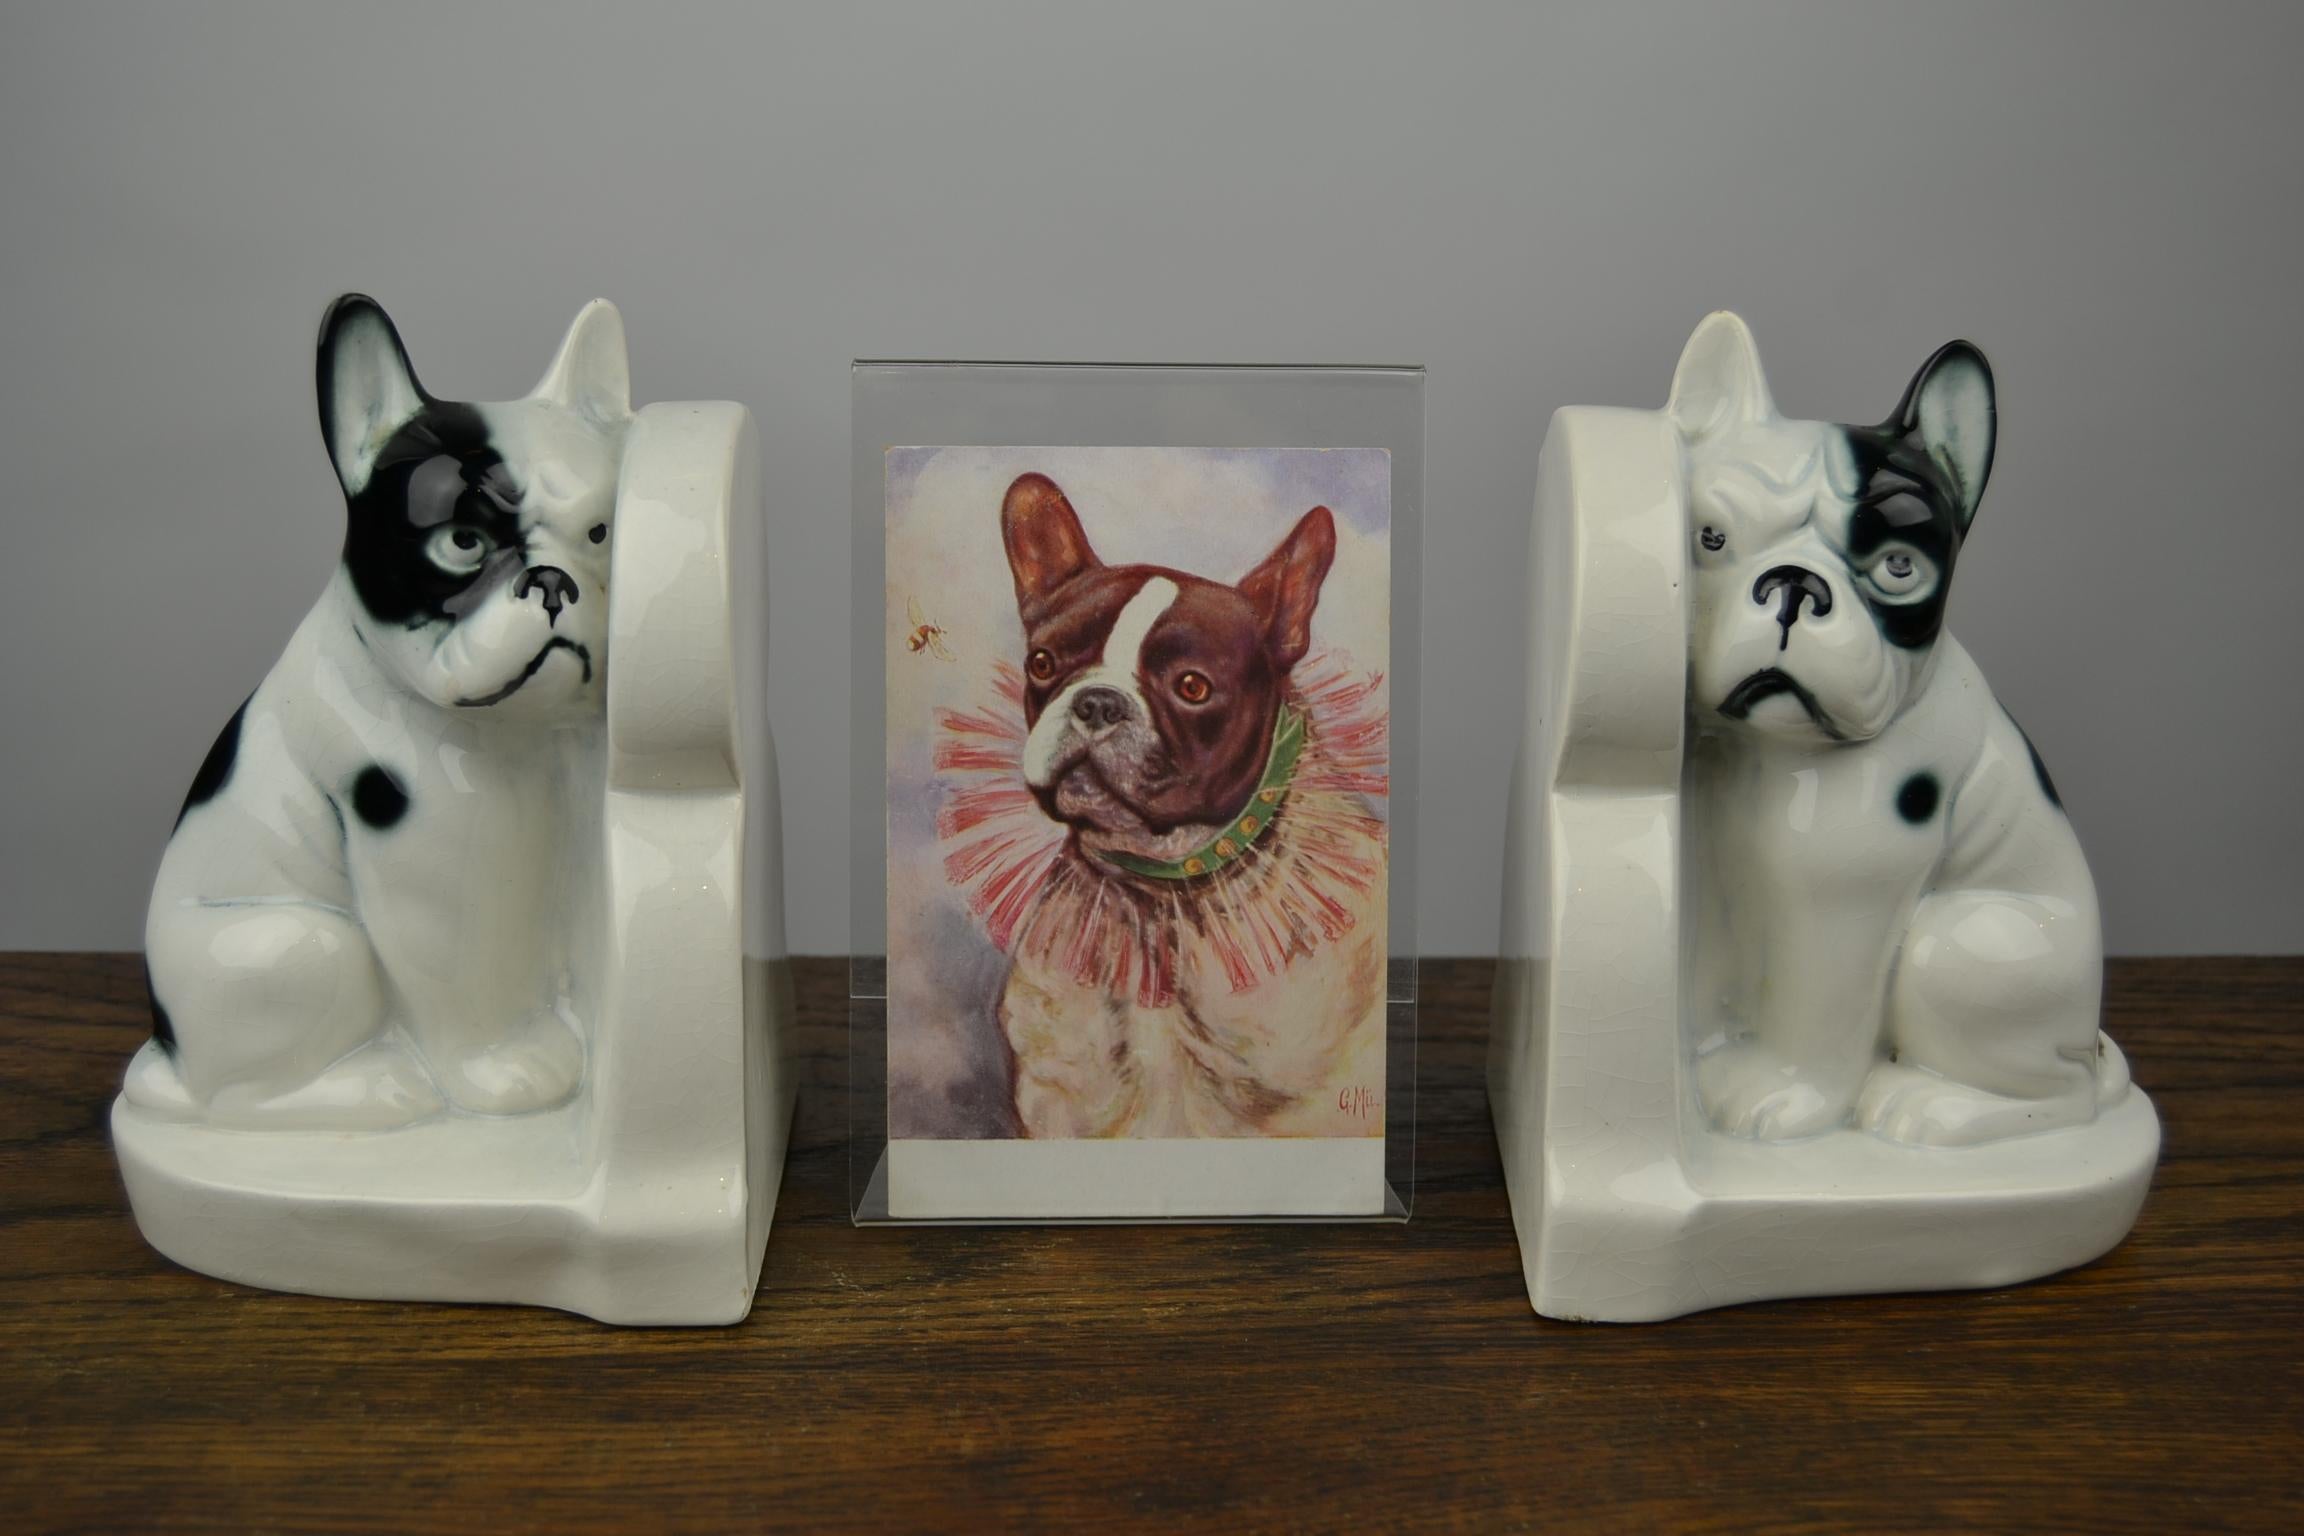 German Art Deco large bookends in the shape of French Bulldog - Bullie - Dog Figurine, circa 1930s.
This male and female dog statues - dog figurines have a lot of expression and are great to watch.
With old craquele patina. 
They have small